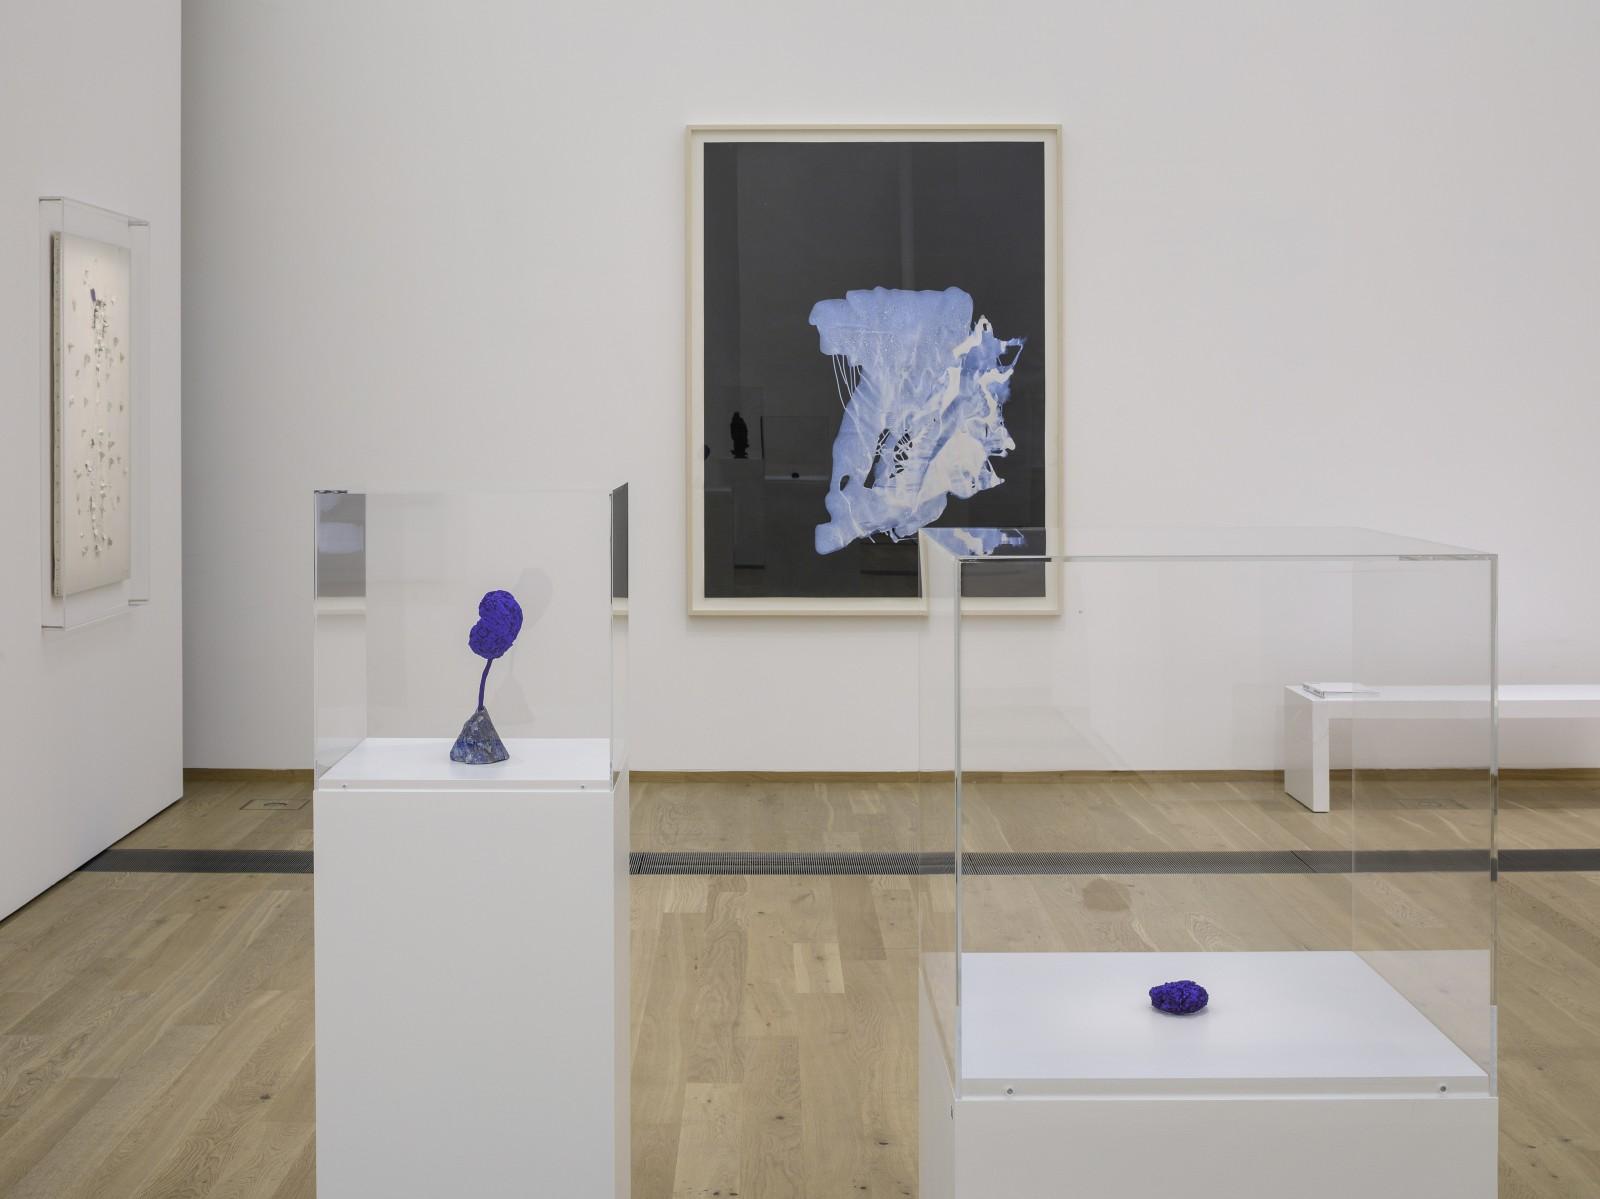 View of the exhibition, "Face-to-Face with Images", Draiflessen Collection, 2017, (SE 185, SE sn 142)